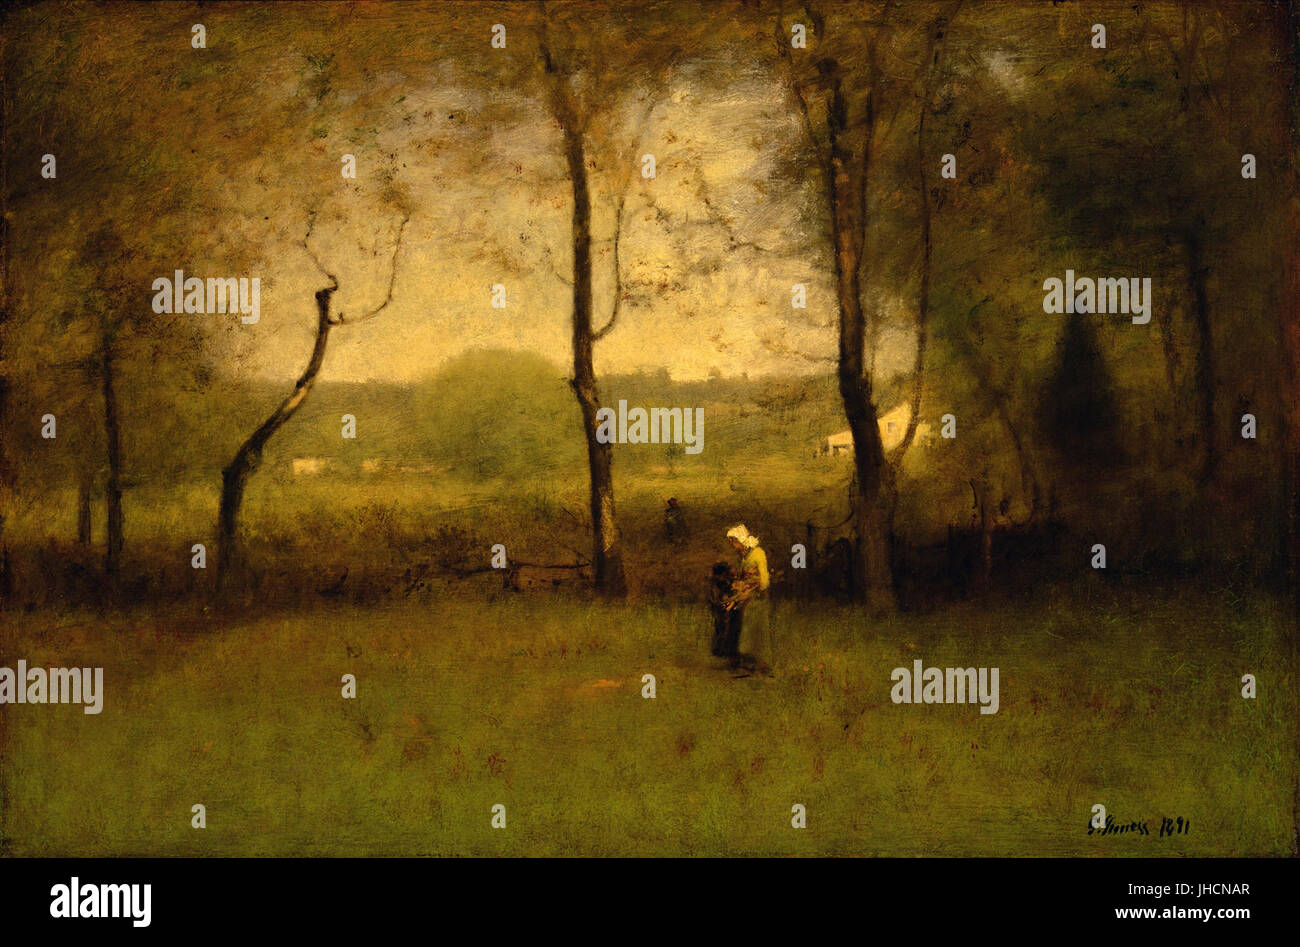 George Inness - Wood Gatherers, An Autumn Afternoon Stock Photo